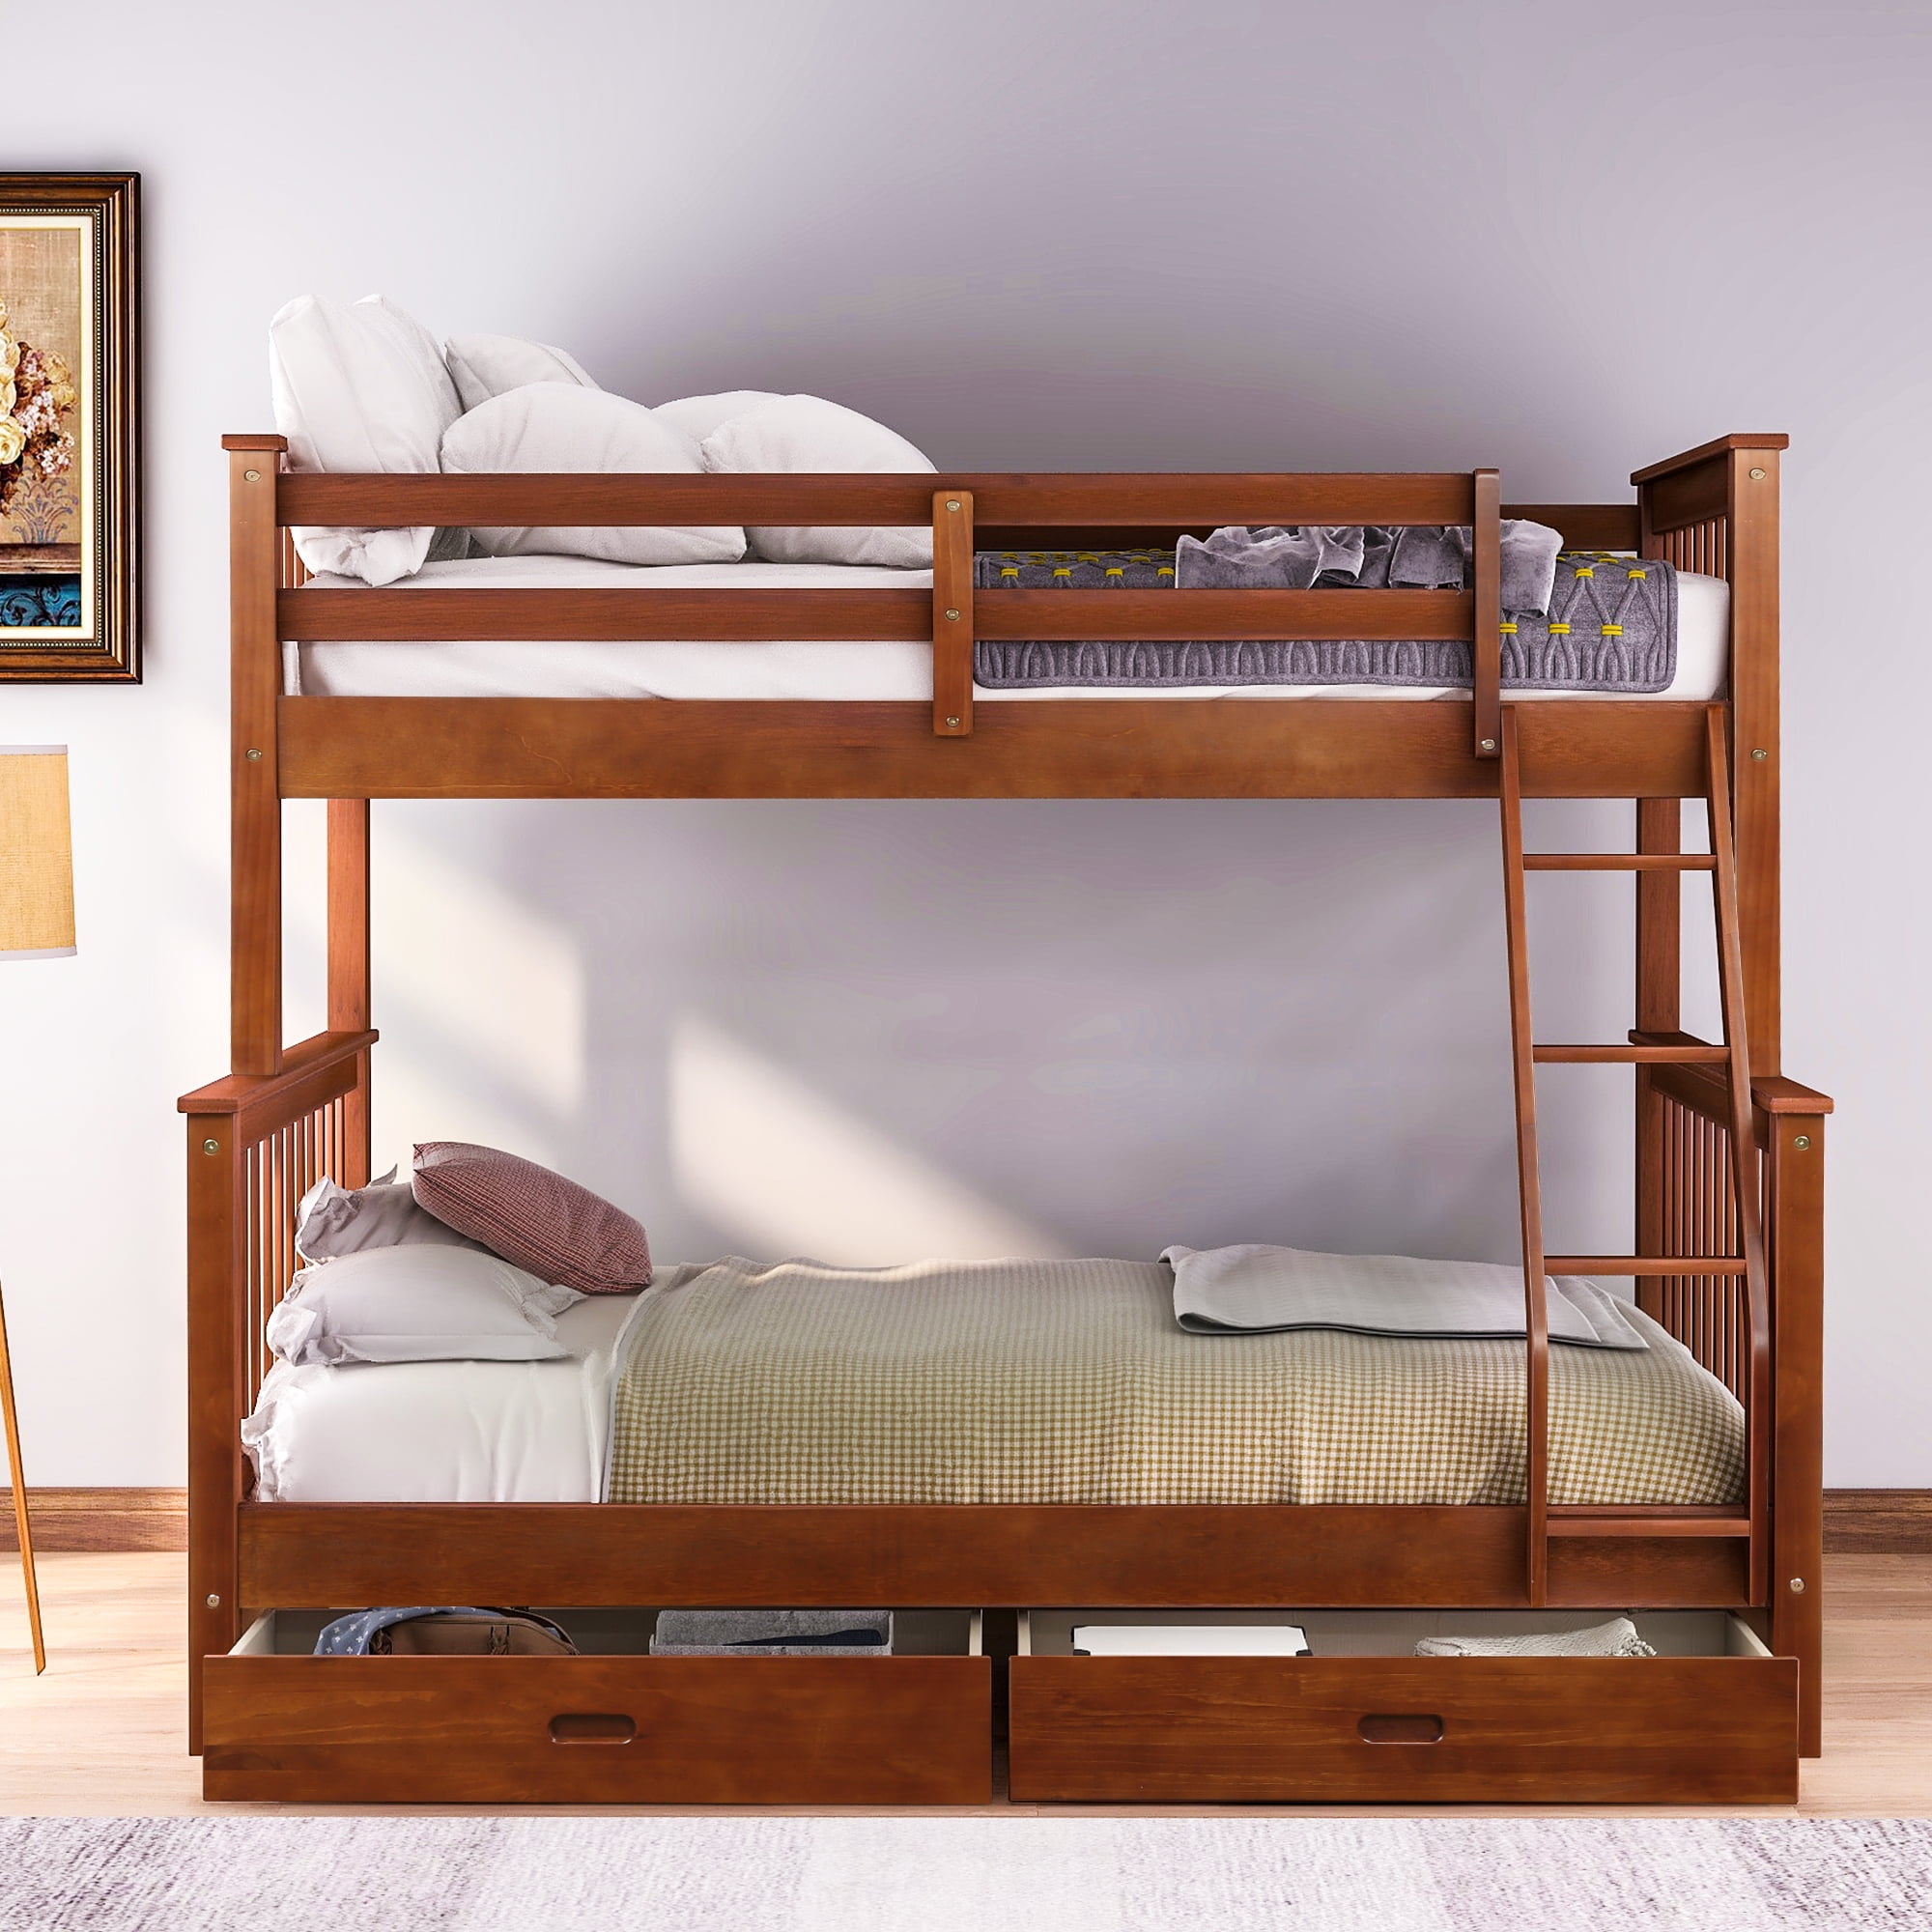 Twin Over Full Bunk Bed Frame Pretty, Bunk Beds With Steps And Storage